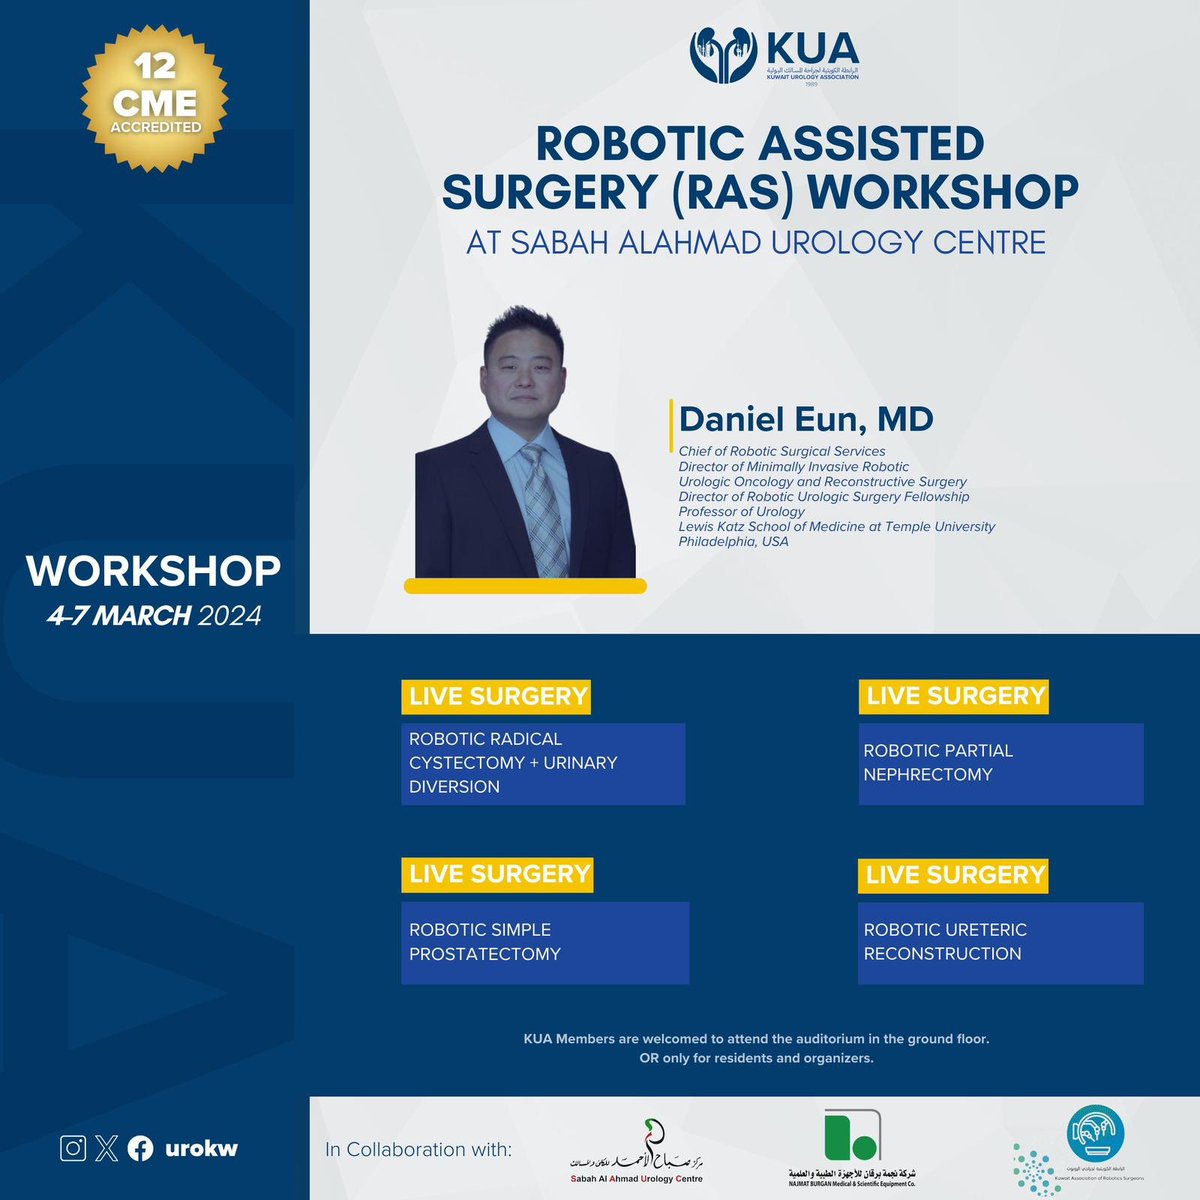 Super excited to travel with my awesome fellow @BrianWChao this next week. Looking forward to meeting and making new friends in Kuwait! @Urokw